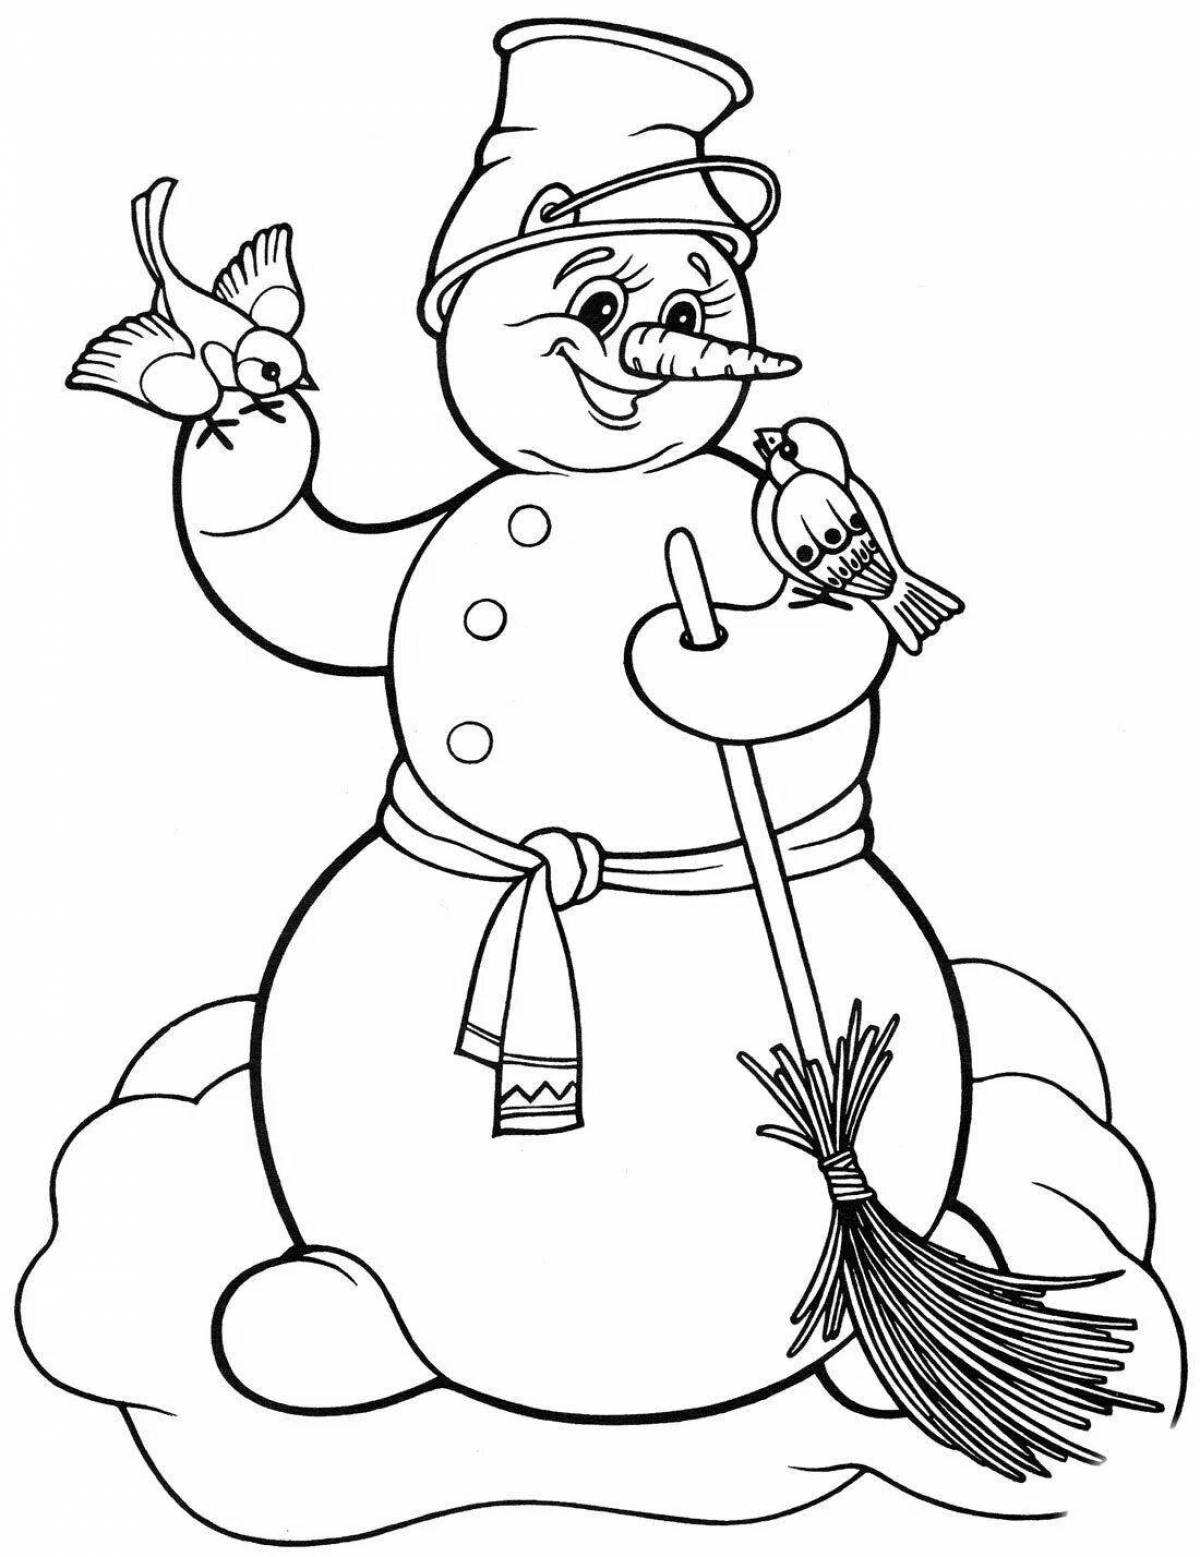 Radiant snowman coloring book for kids